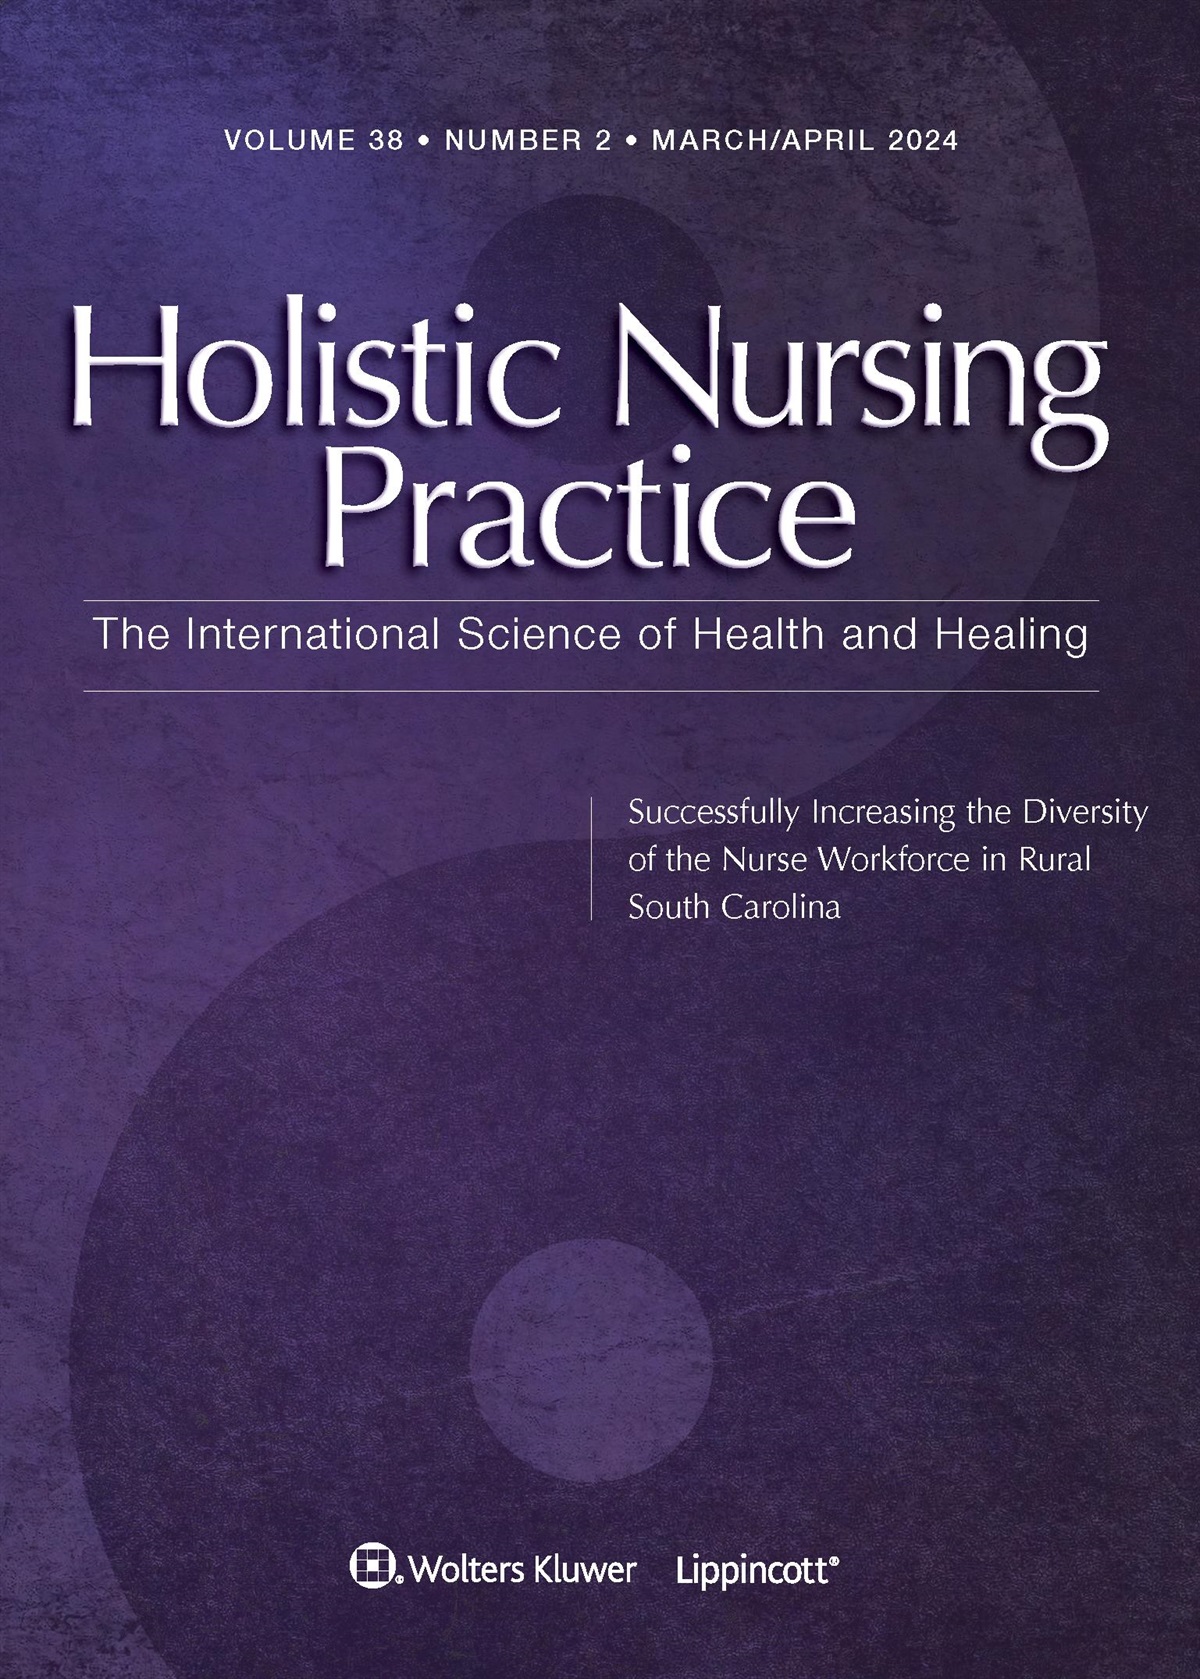 Exploring Emotional Intelligence as a Potential Resource for Improving the Experience of Novice Nurses